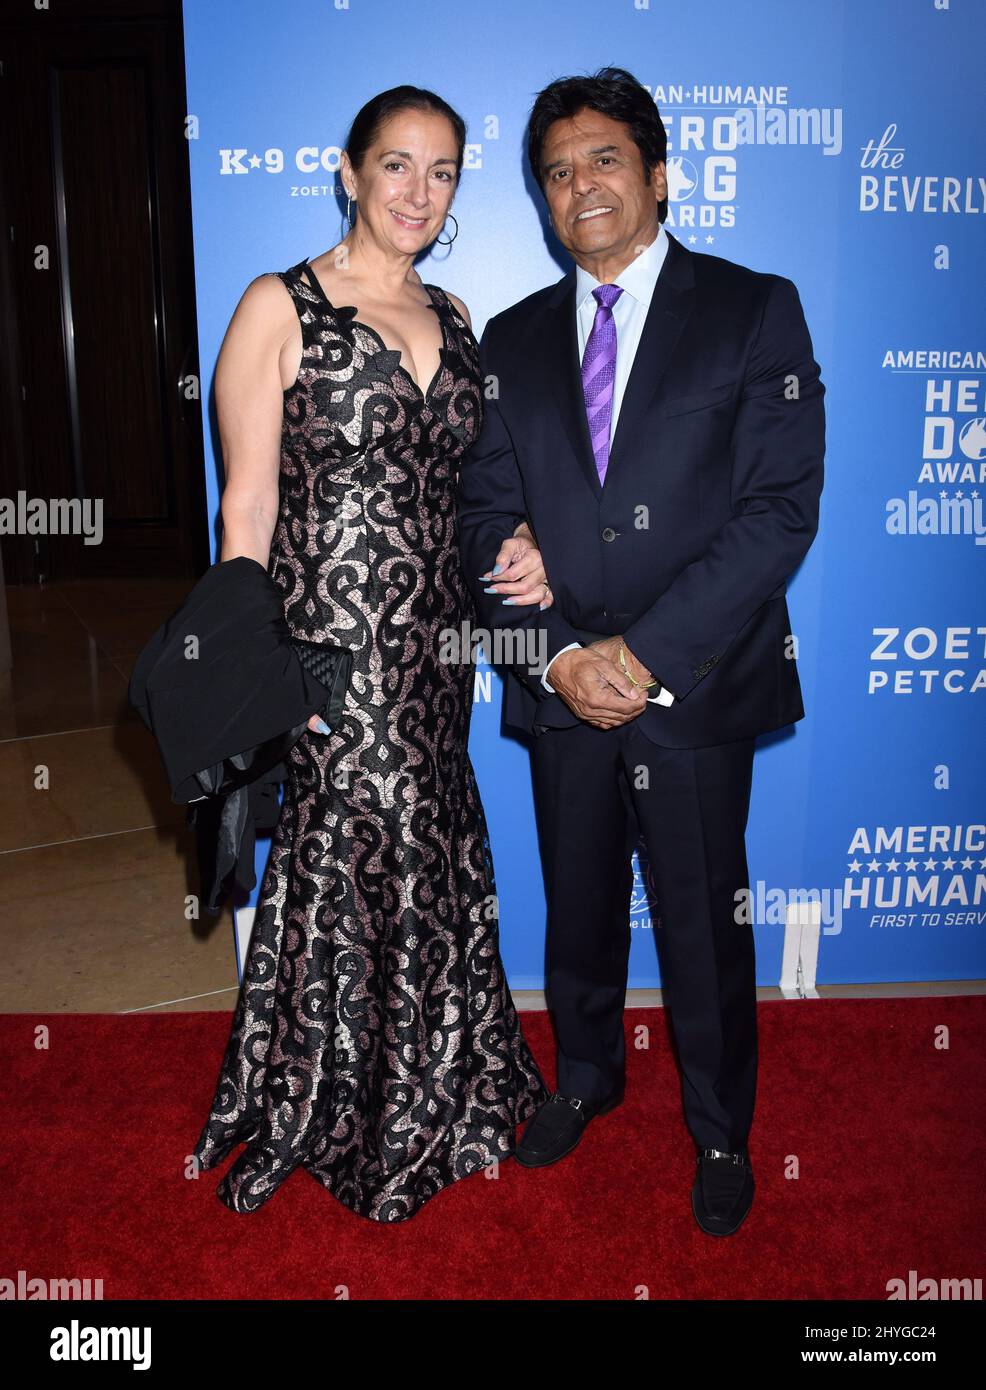 Erik Estrada and Nanette Estrada at the 2018 American Humane Hero Dog Awards held at the Beverly Hilton Hotel on September 29, 2018 in Beverly Hills, USA. Stock Photo